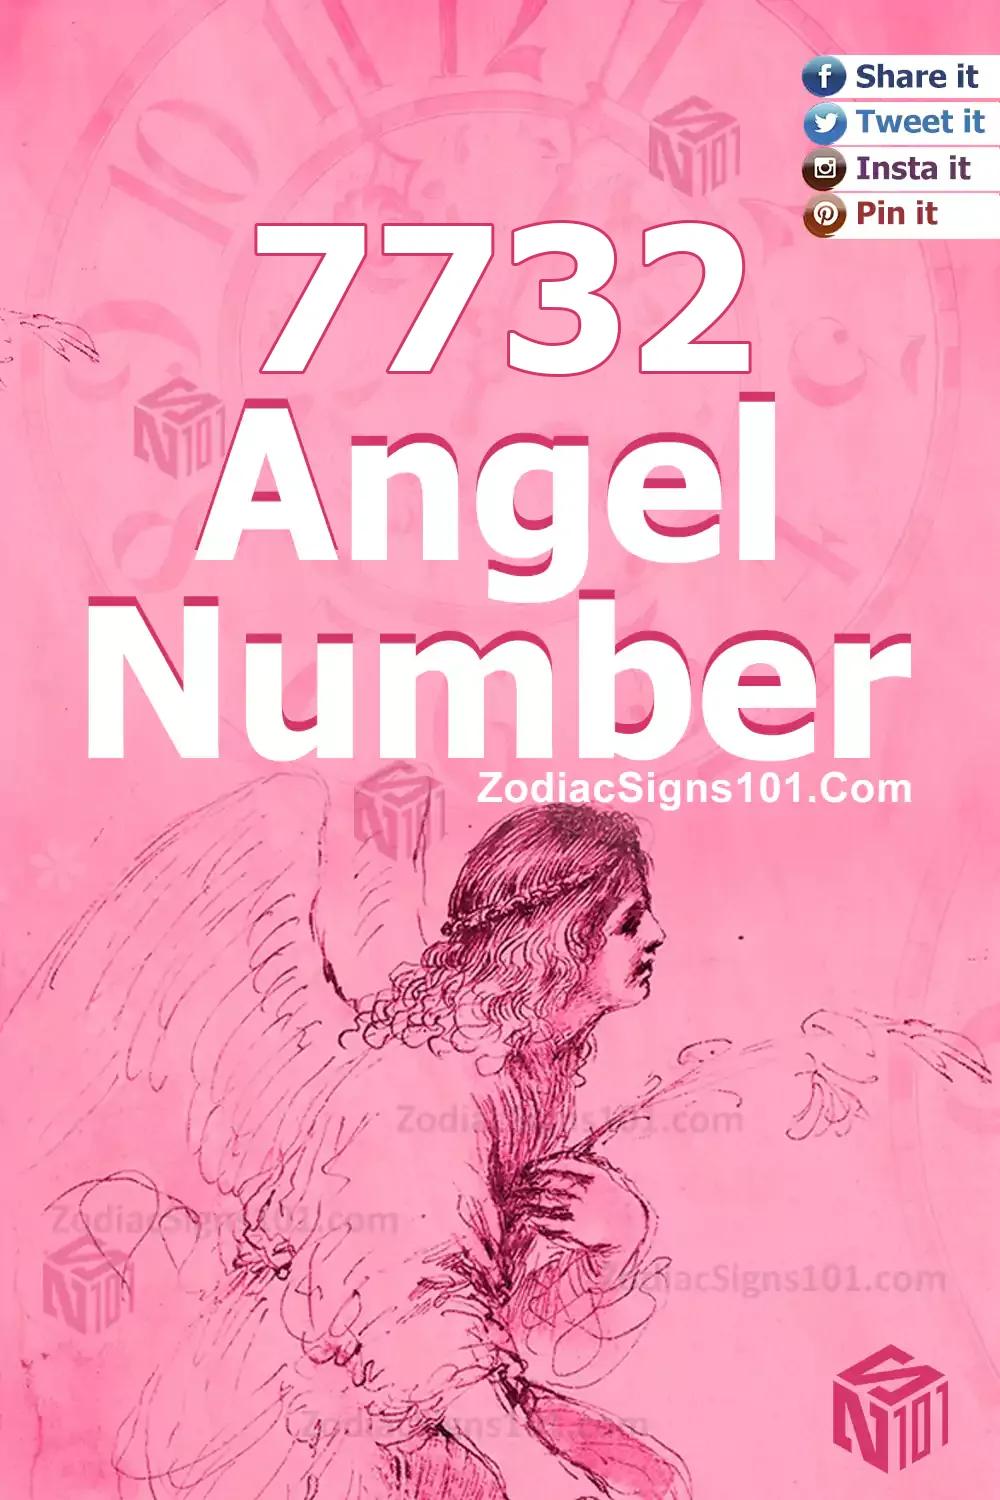 7732 Angel Number Meaning